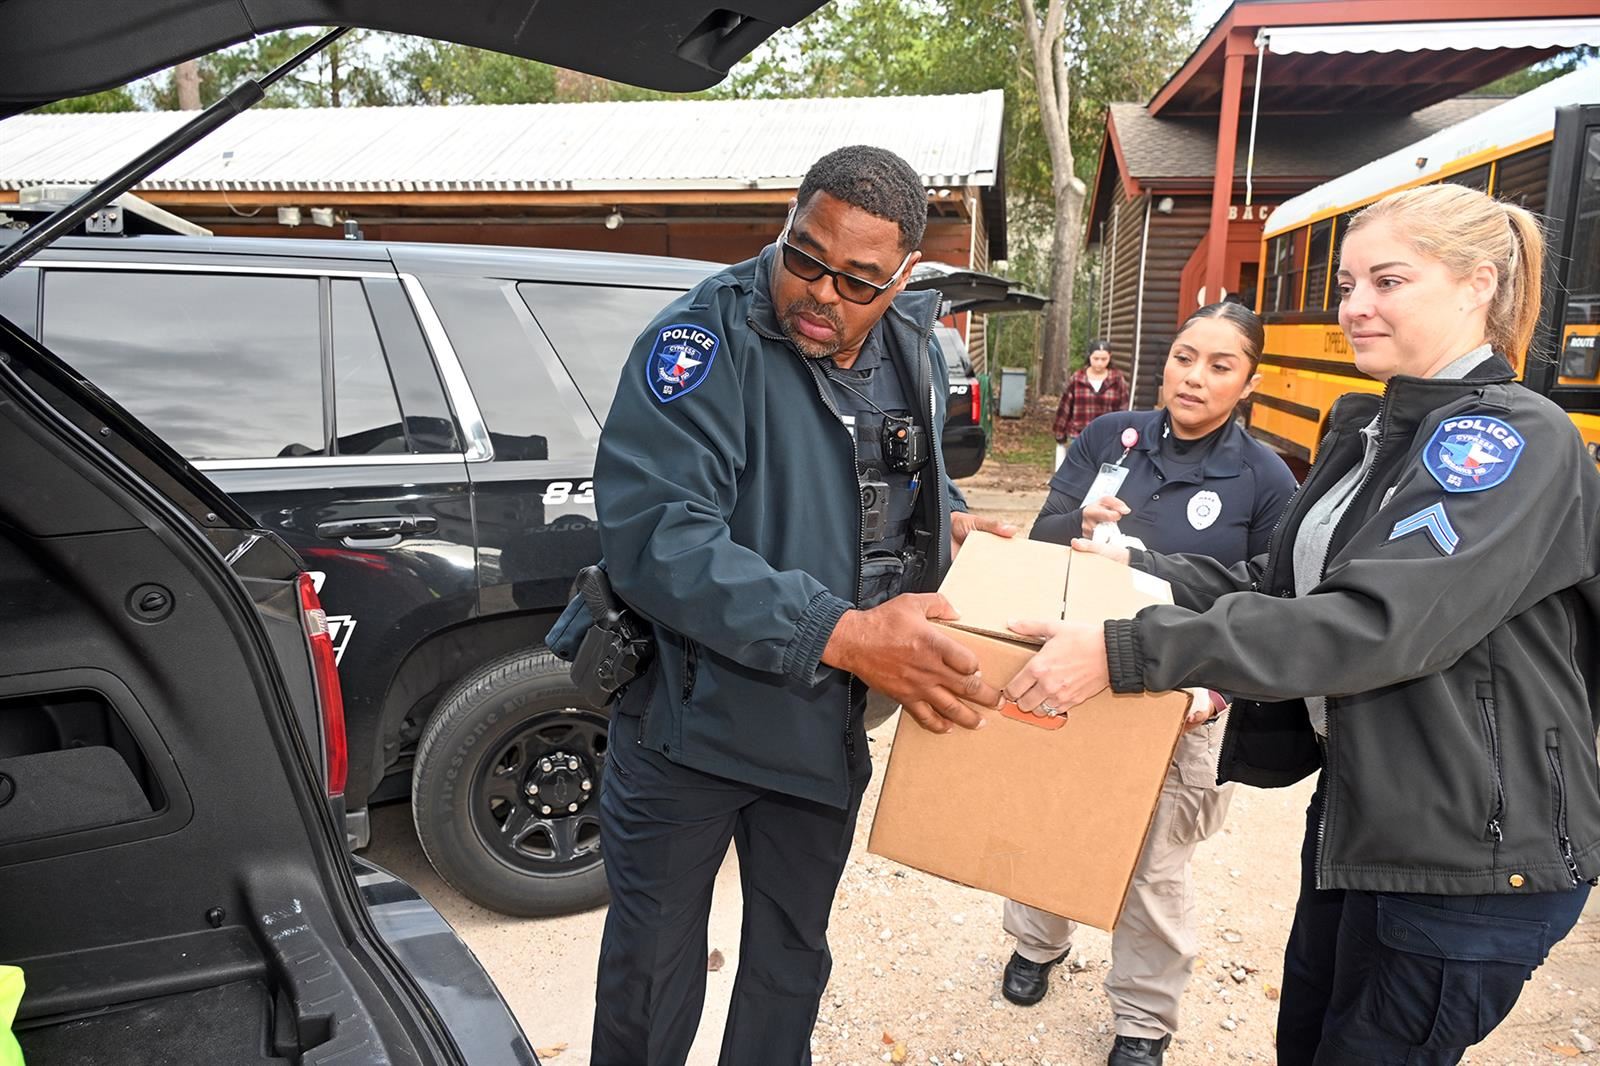 CFISD police officers met at Cy-Hope on Nov. 21 to load their service vehicles and a CFISD school bus with the 50 meals.